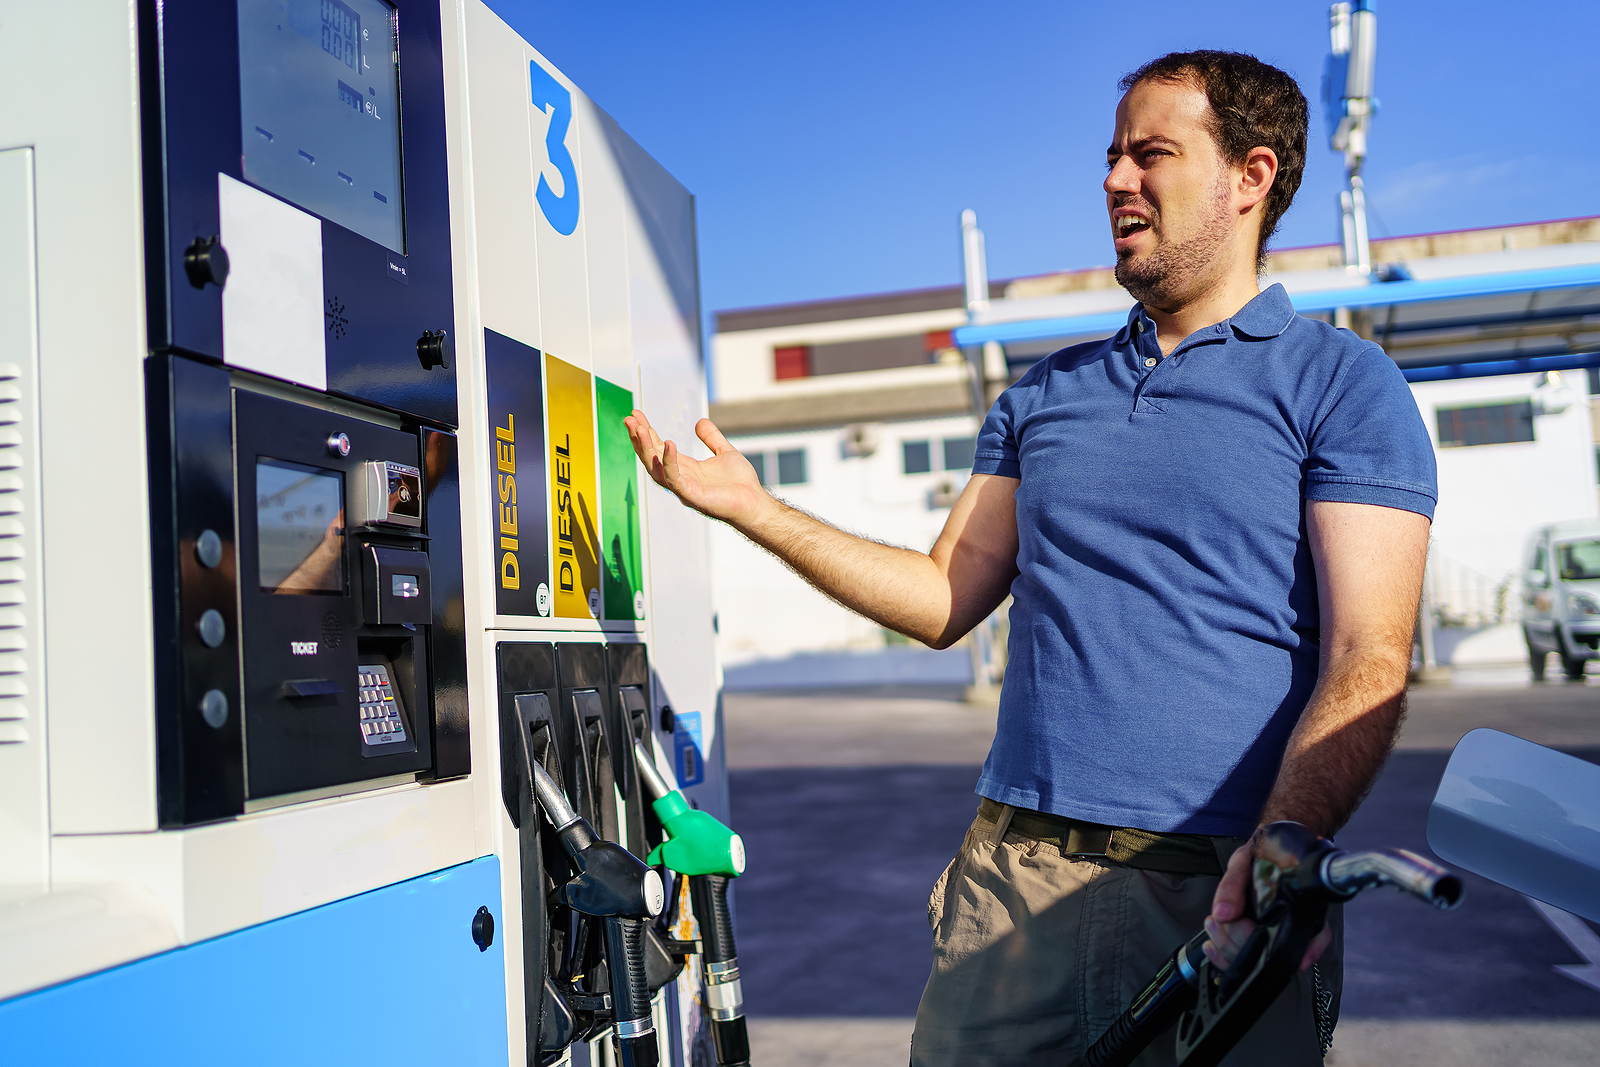 Fuels: gasoline and diesel more expensive this week. - AutoGear